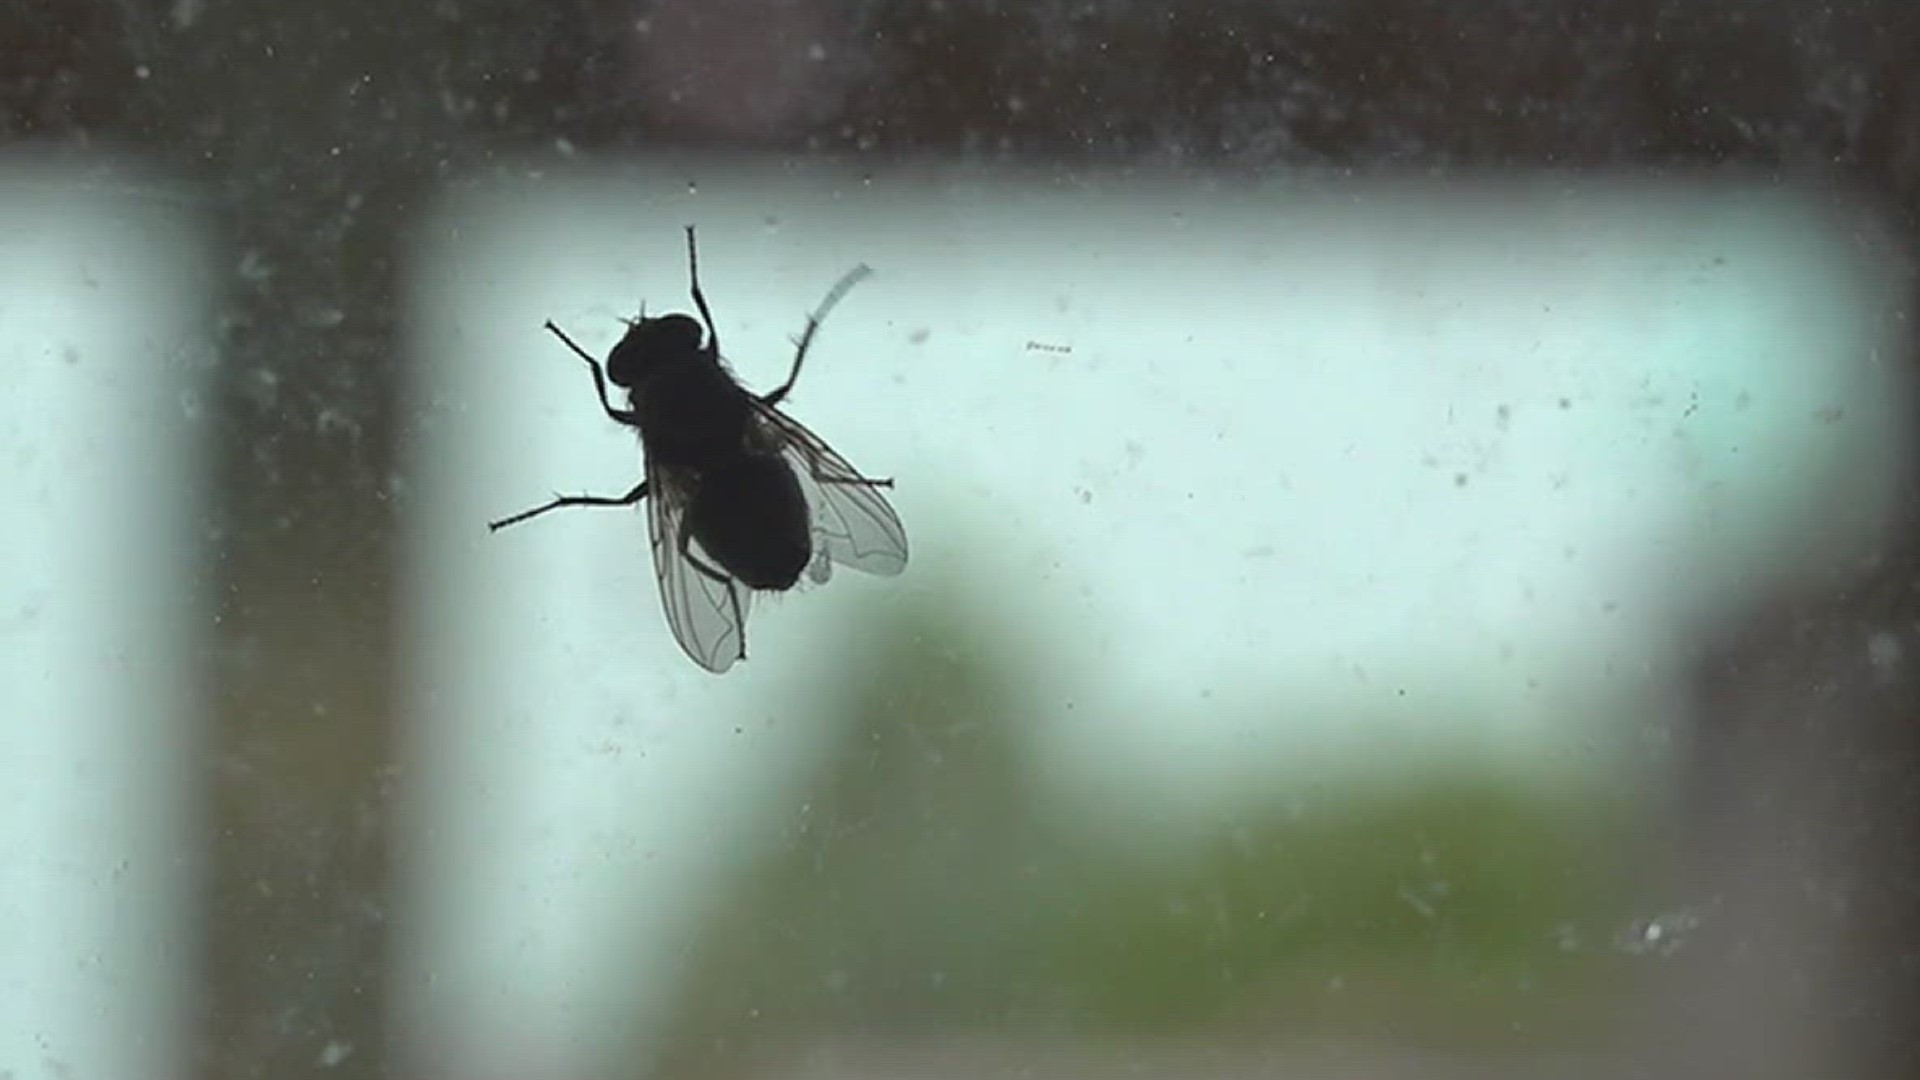 Officials say that early warmer weather has given flies and mosquitoes a head start on the season.